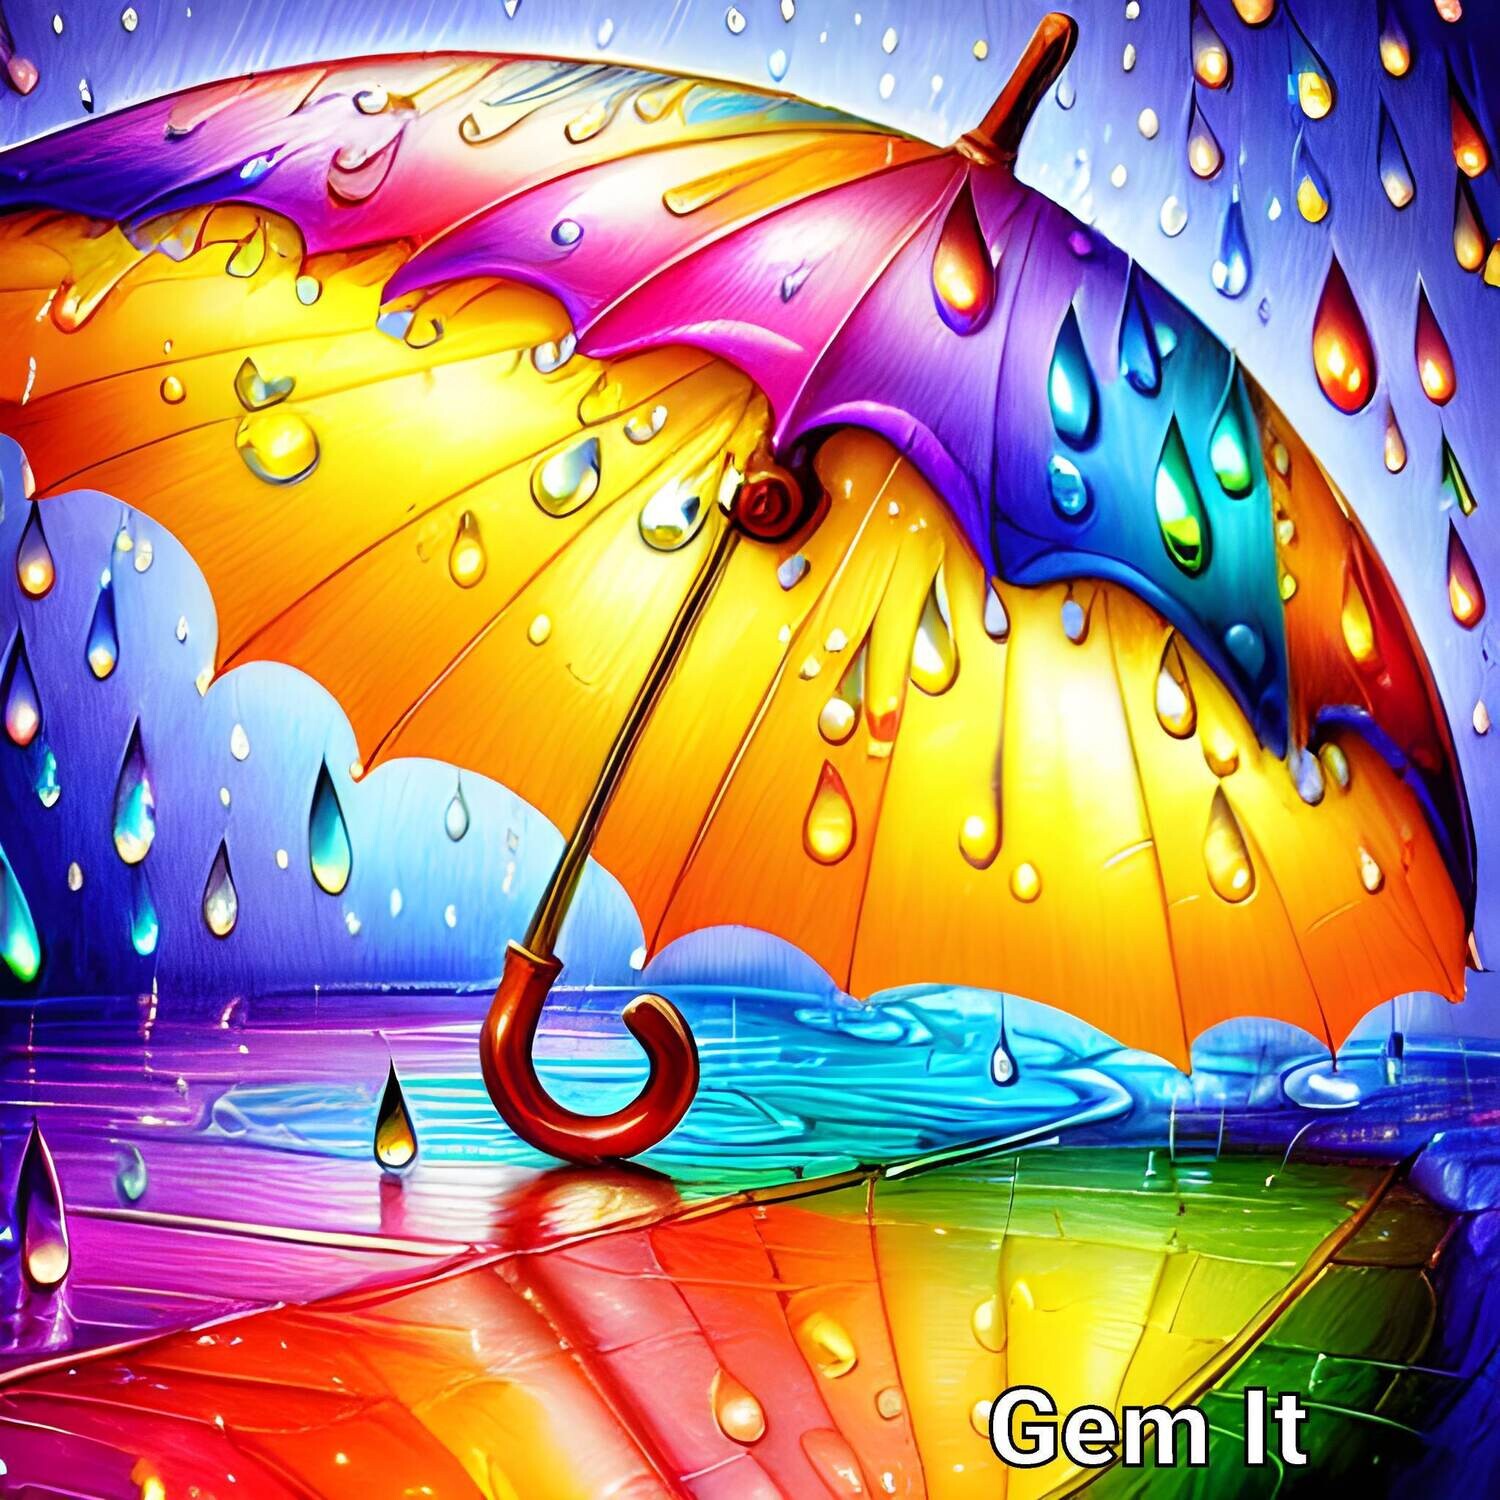 Colourful Umbrella 1 - Full Drill Diamond Painting - Specially ordered for you. Delivery is approximately 4 - 6 weeks.